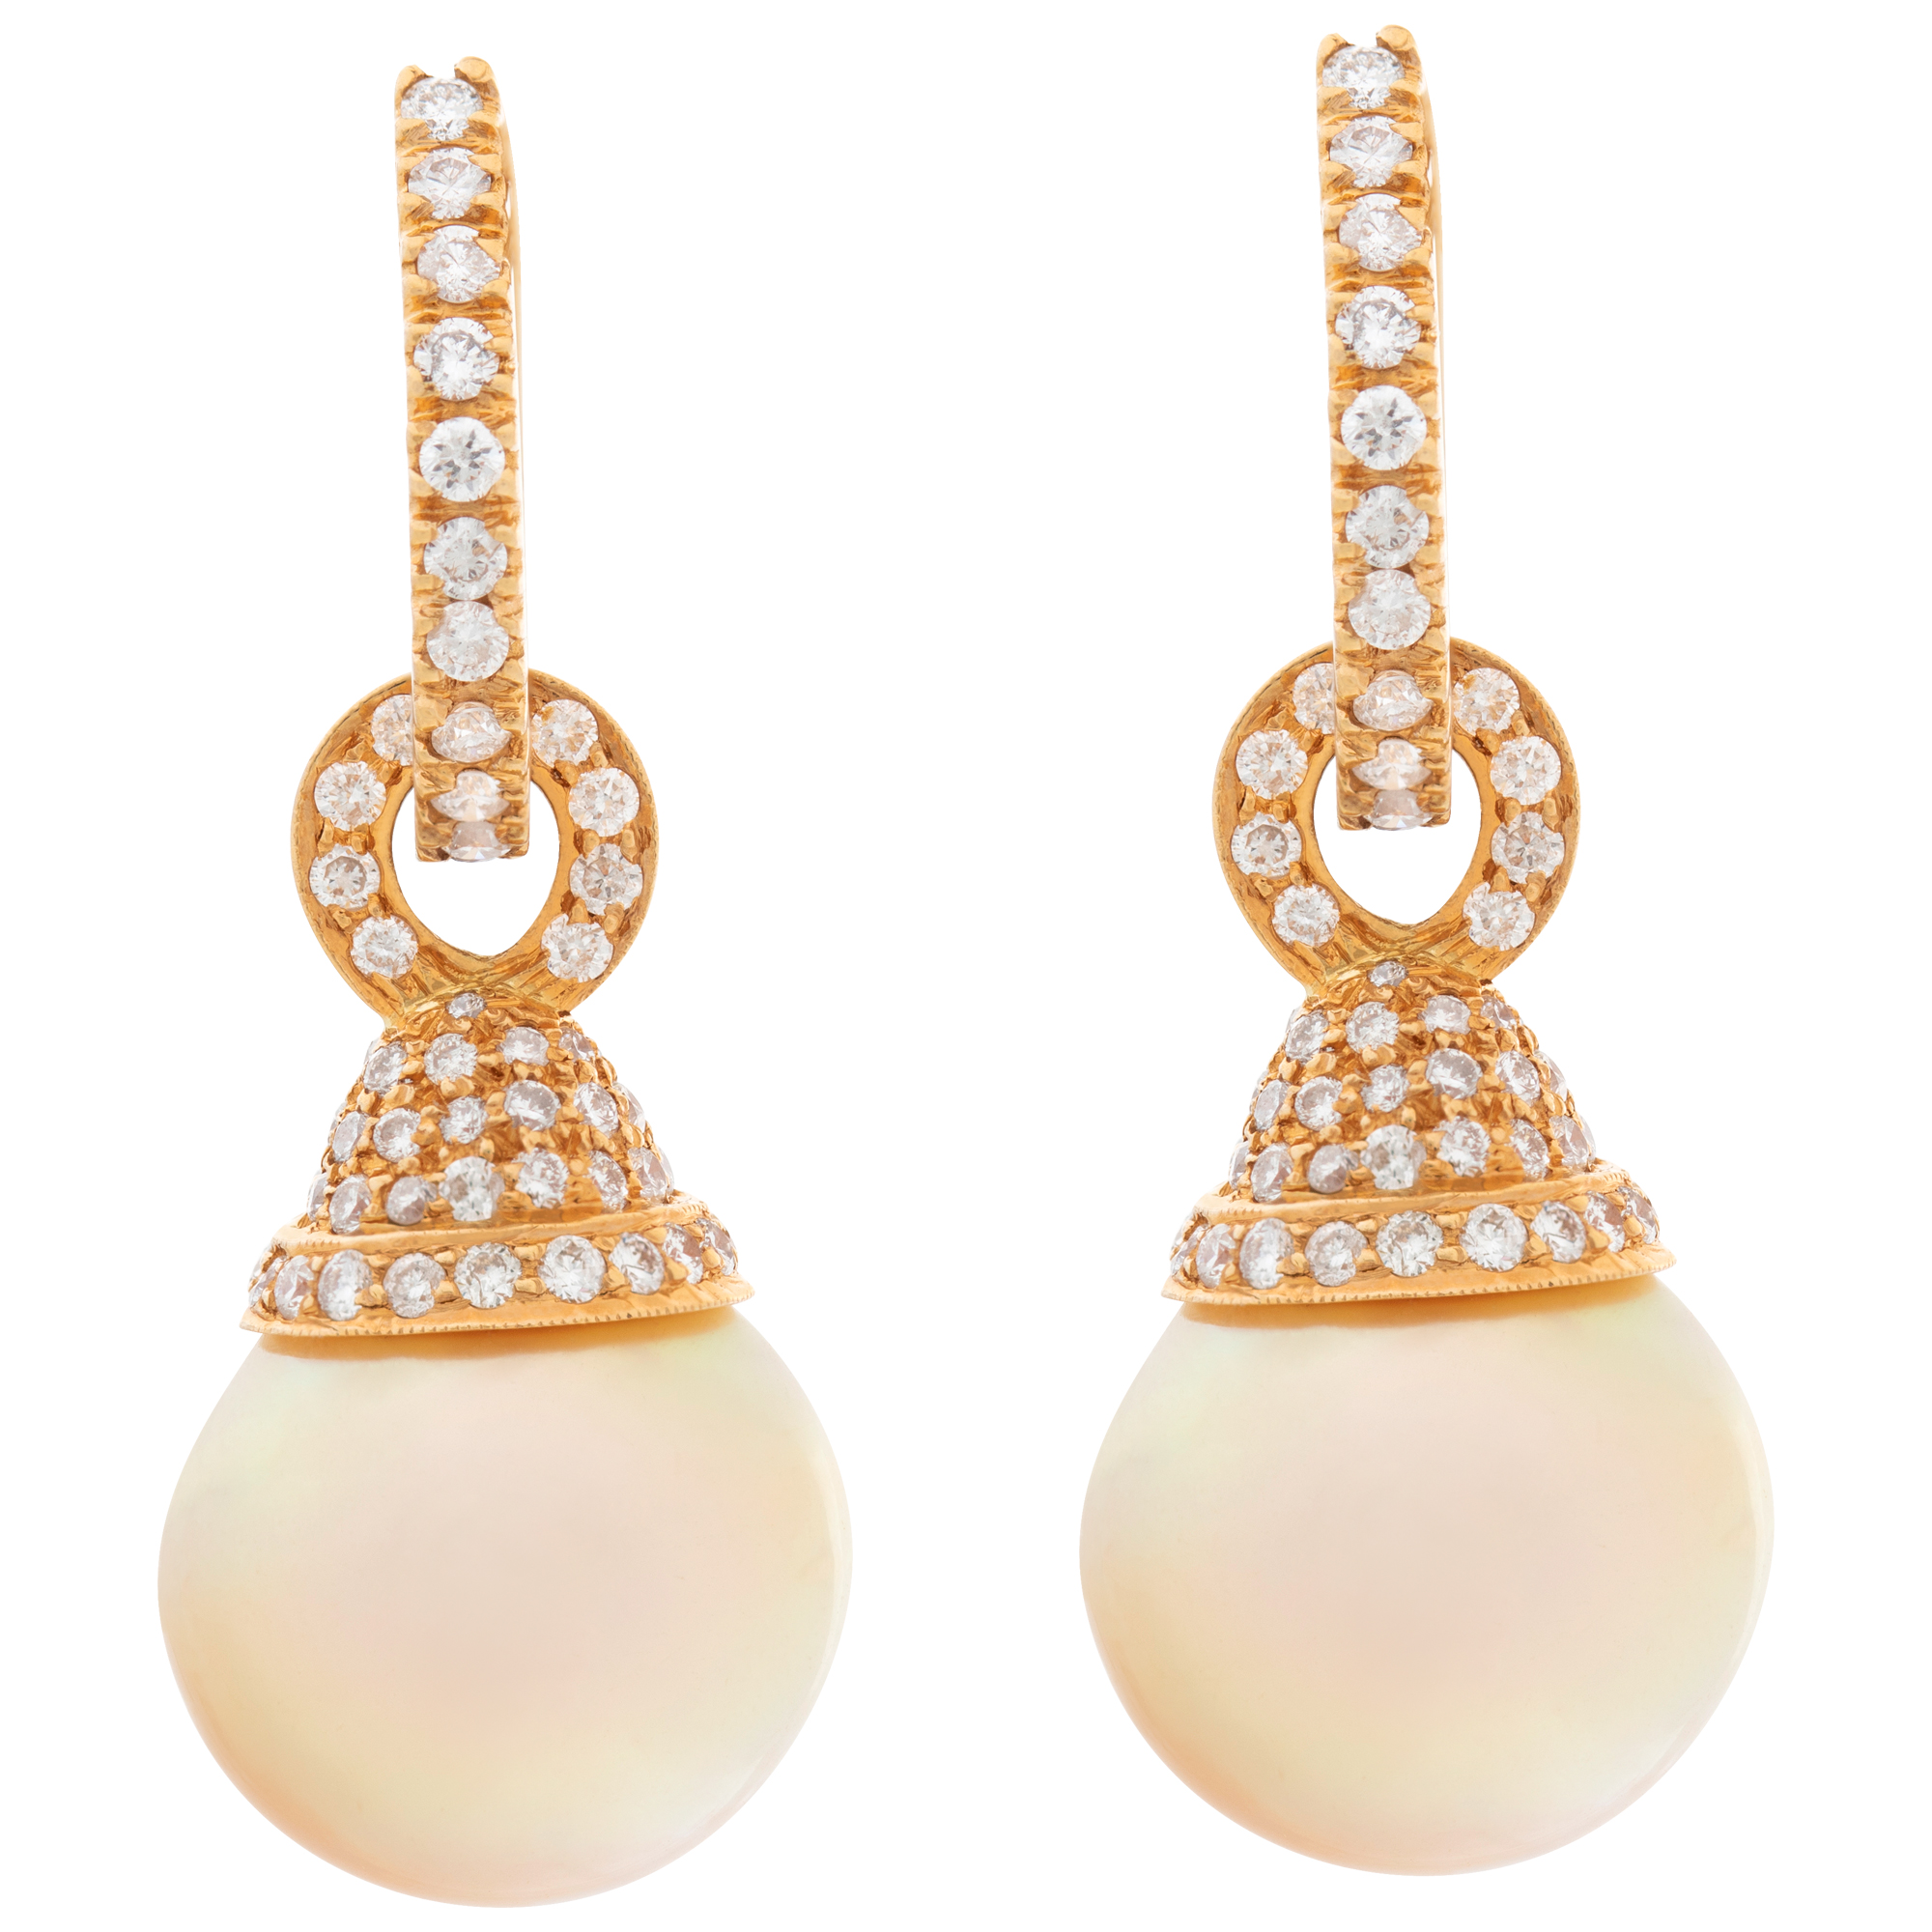 South Sea pearls (15 x 16mm)  and approx 2 carats diamonds dangling earrings set in 18k